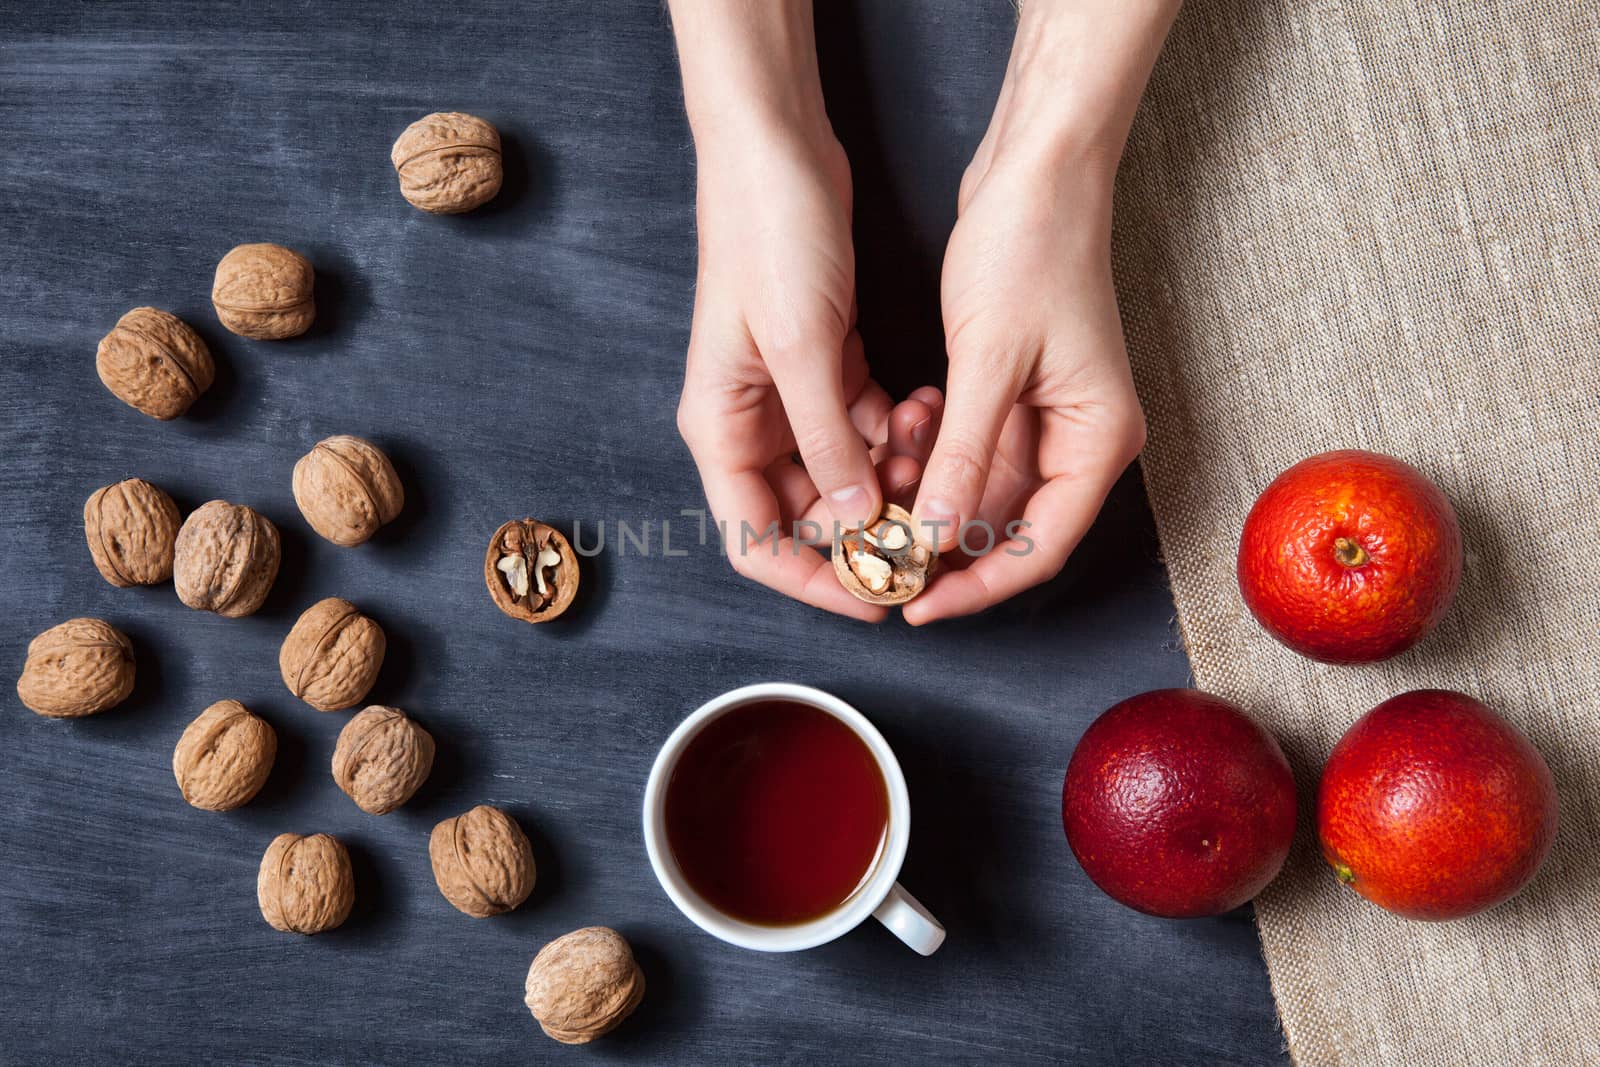 girl holds a walnut in the hands on wooden table with red oranges